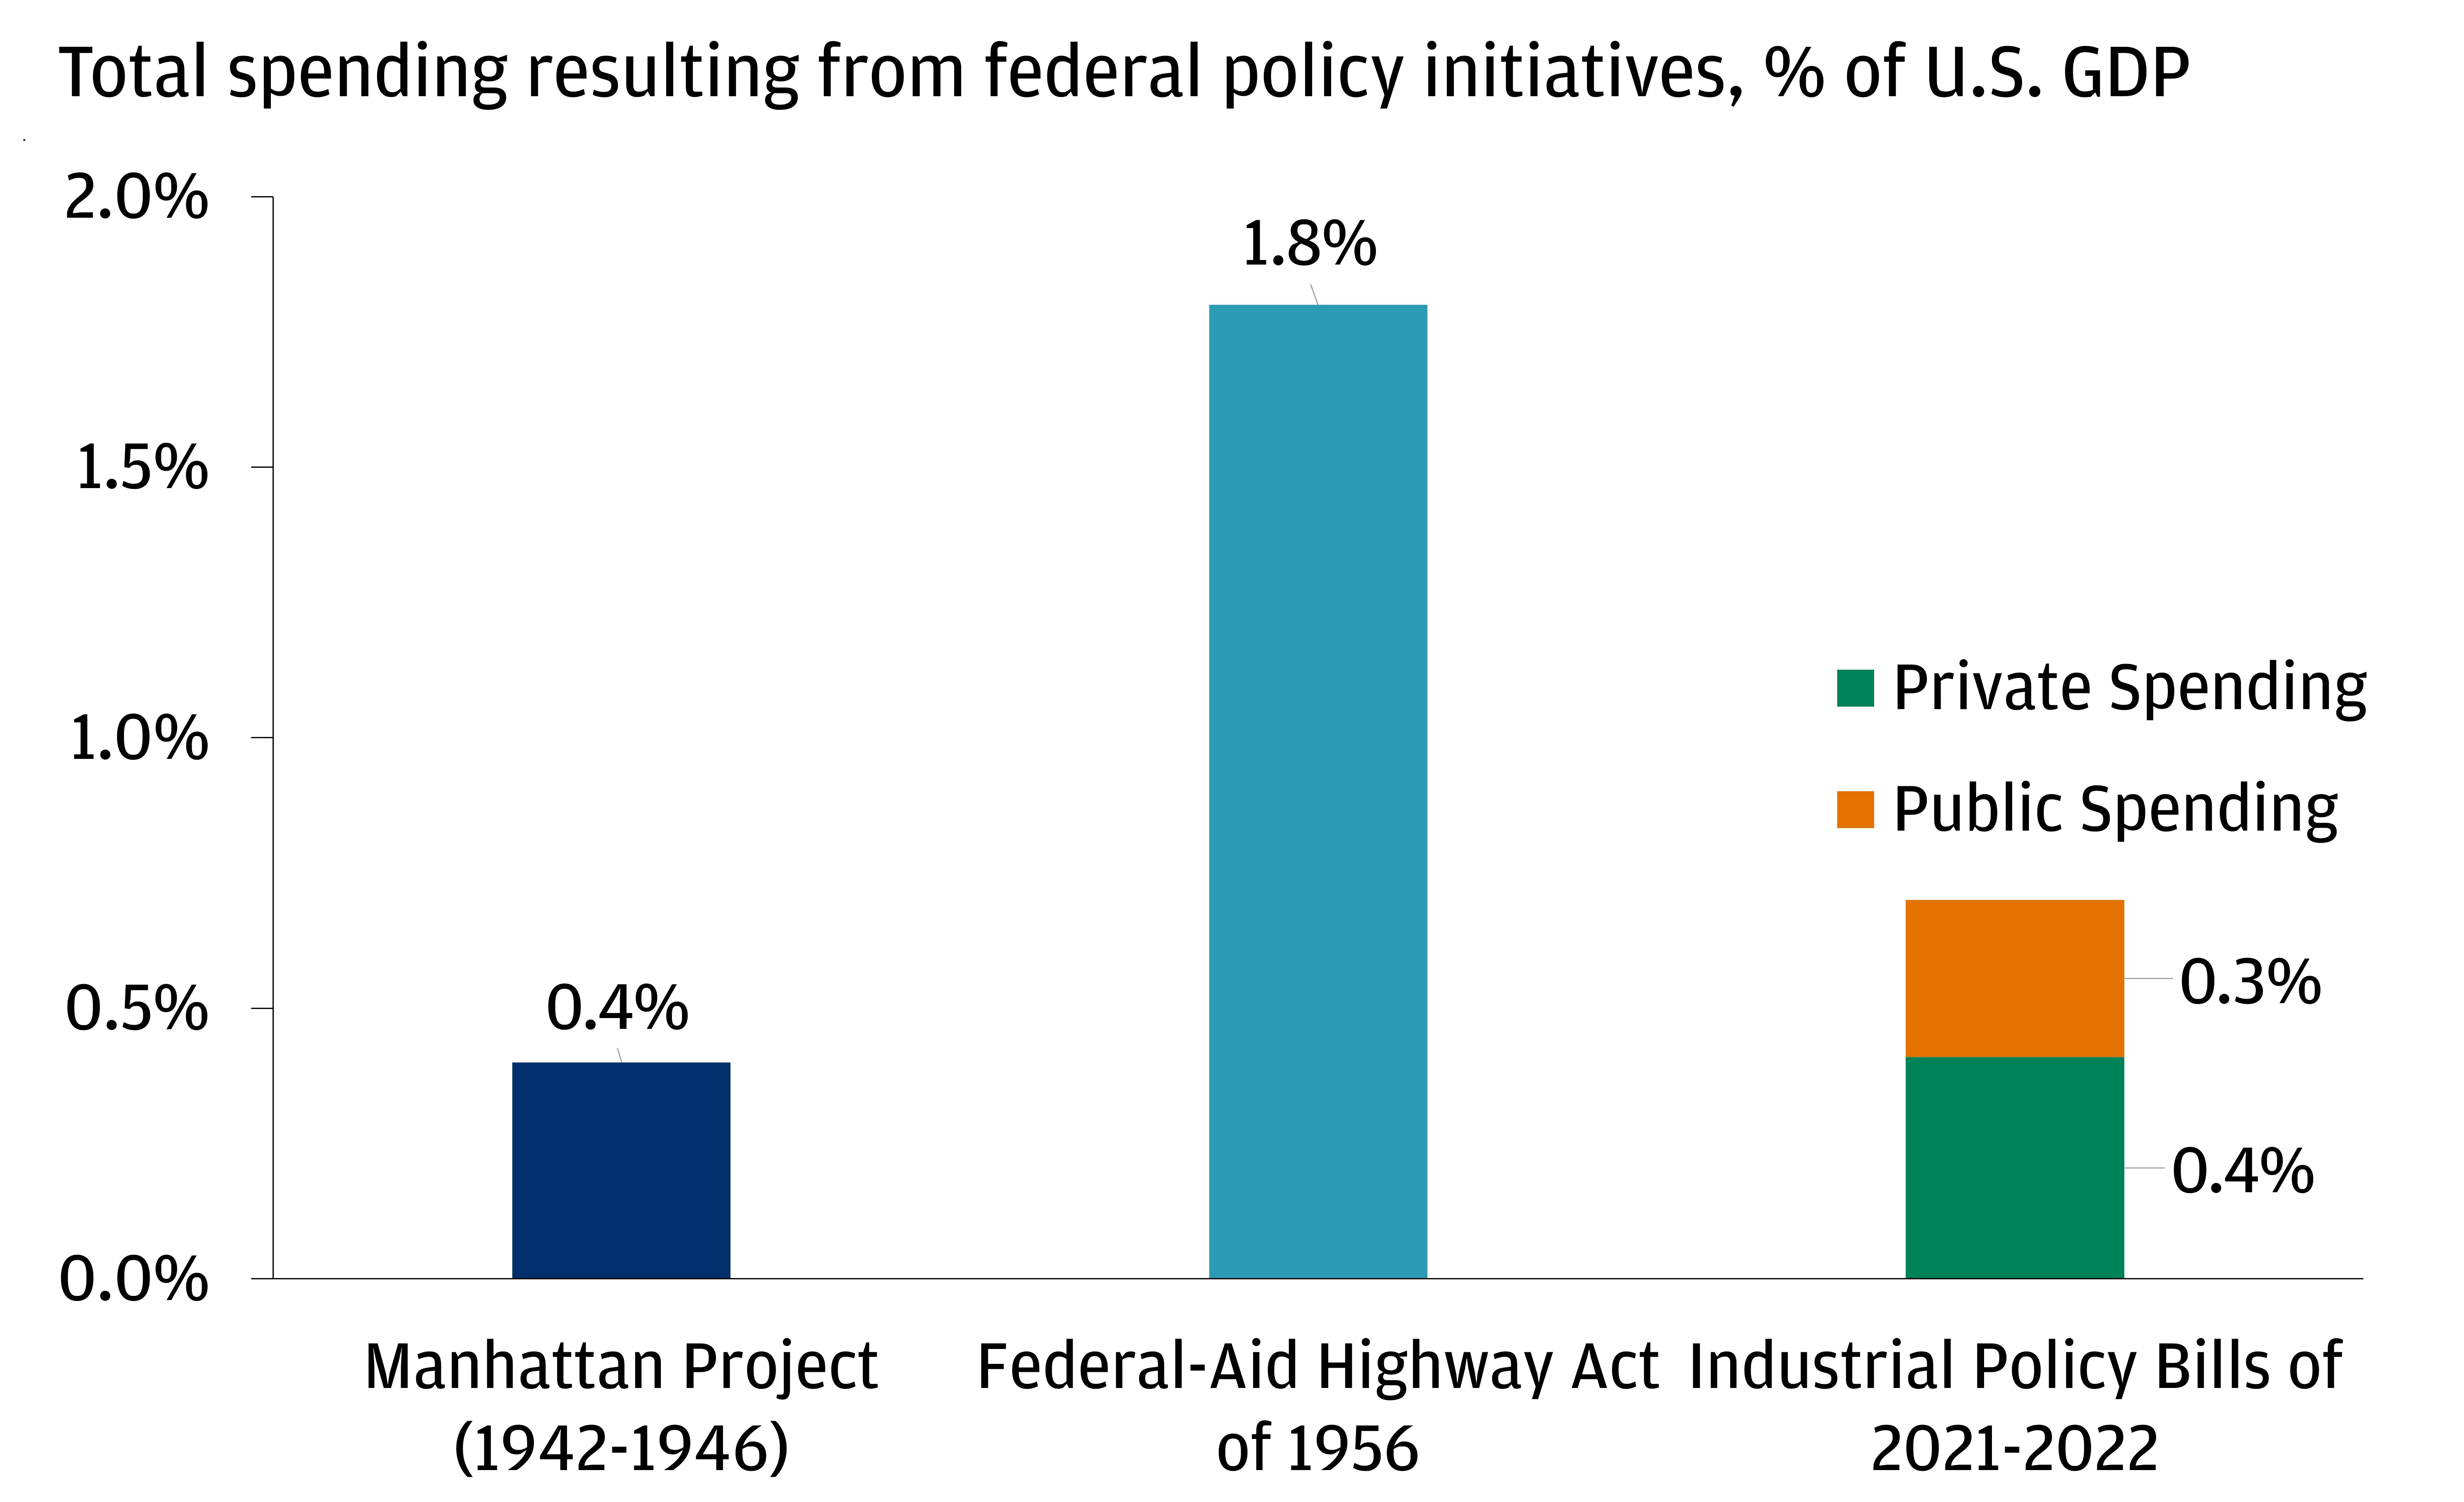 The chart describes total spending resulting from federal policy initiatives as % of GDP. 